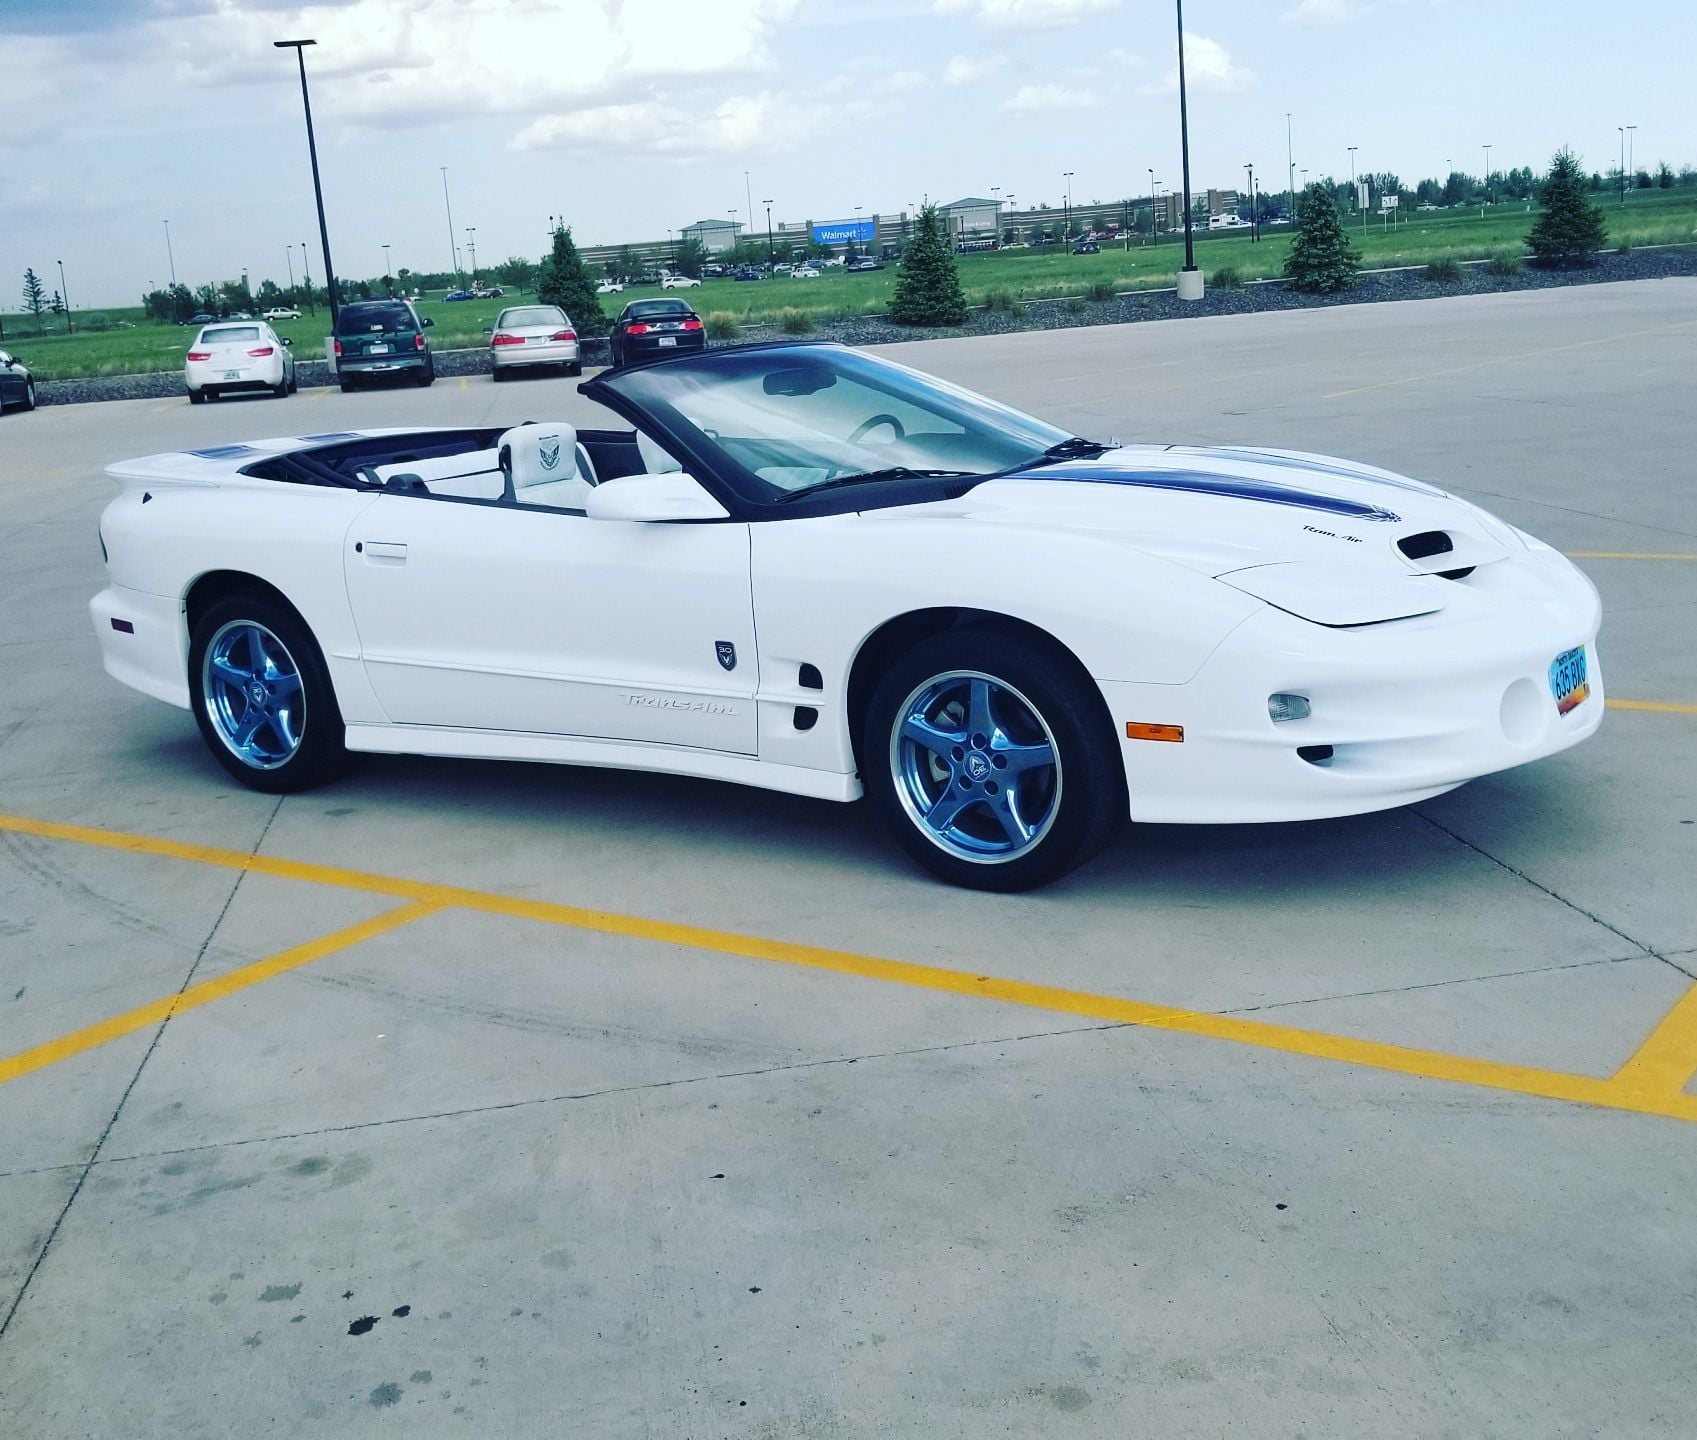 1999 Pontiac Firebird - 1999 30th Anniversary Trans Am Convertible #212 - Used - VIN 2G2FV32G5X2214650 - 34,500 Miles - 8 cyl - 2WD - Automatic - Convertible - White - Fort Ransom, ND 58033, United States